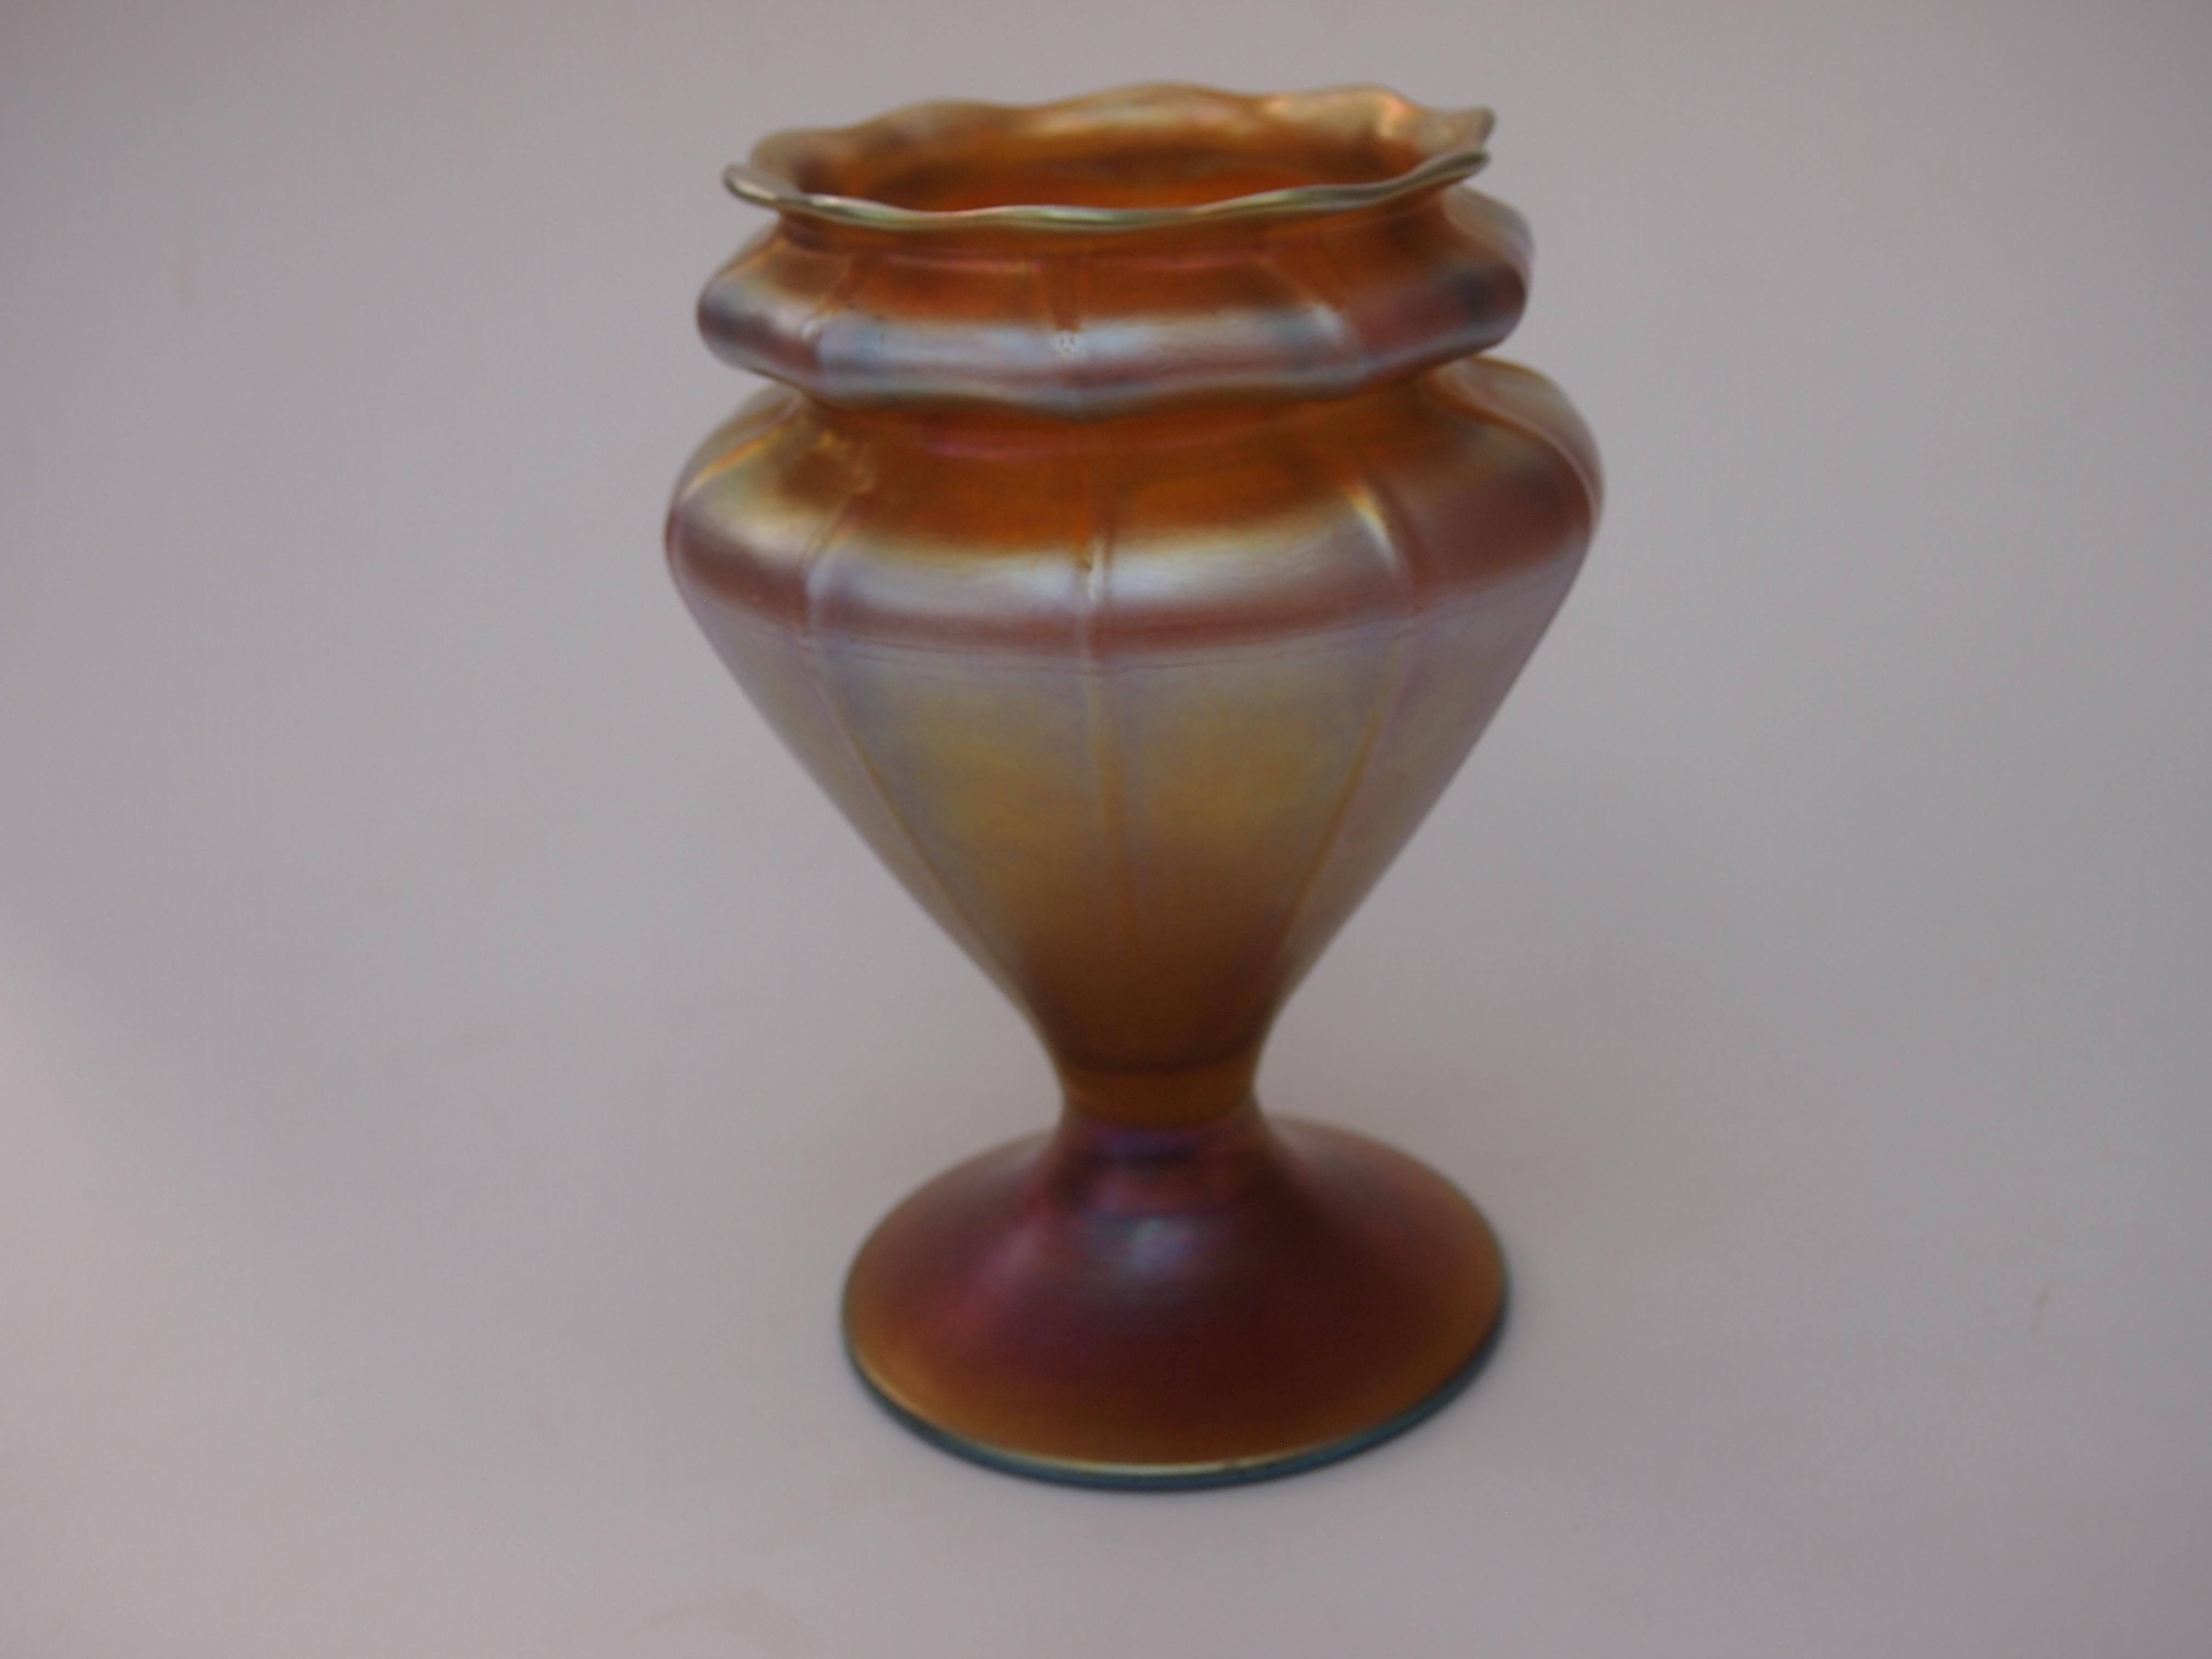 Fabulous footed L C Tiffany Favrile vase in iridised gold, ribbed, double waisted and with wavy top -in a good size-7 inches tall. Fully signed with shape code and production number.

Louis Comfort Tiffany was the son of the founder of the famed